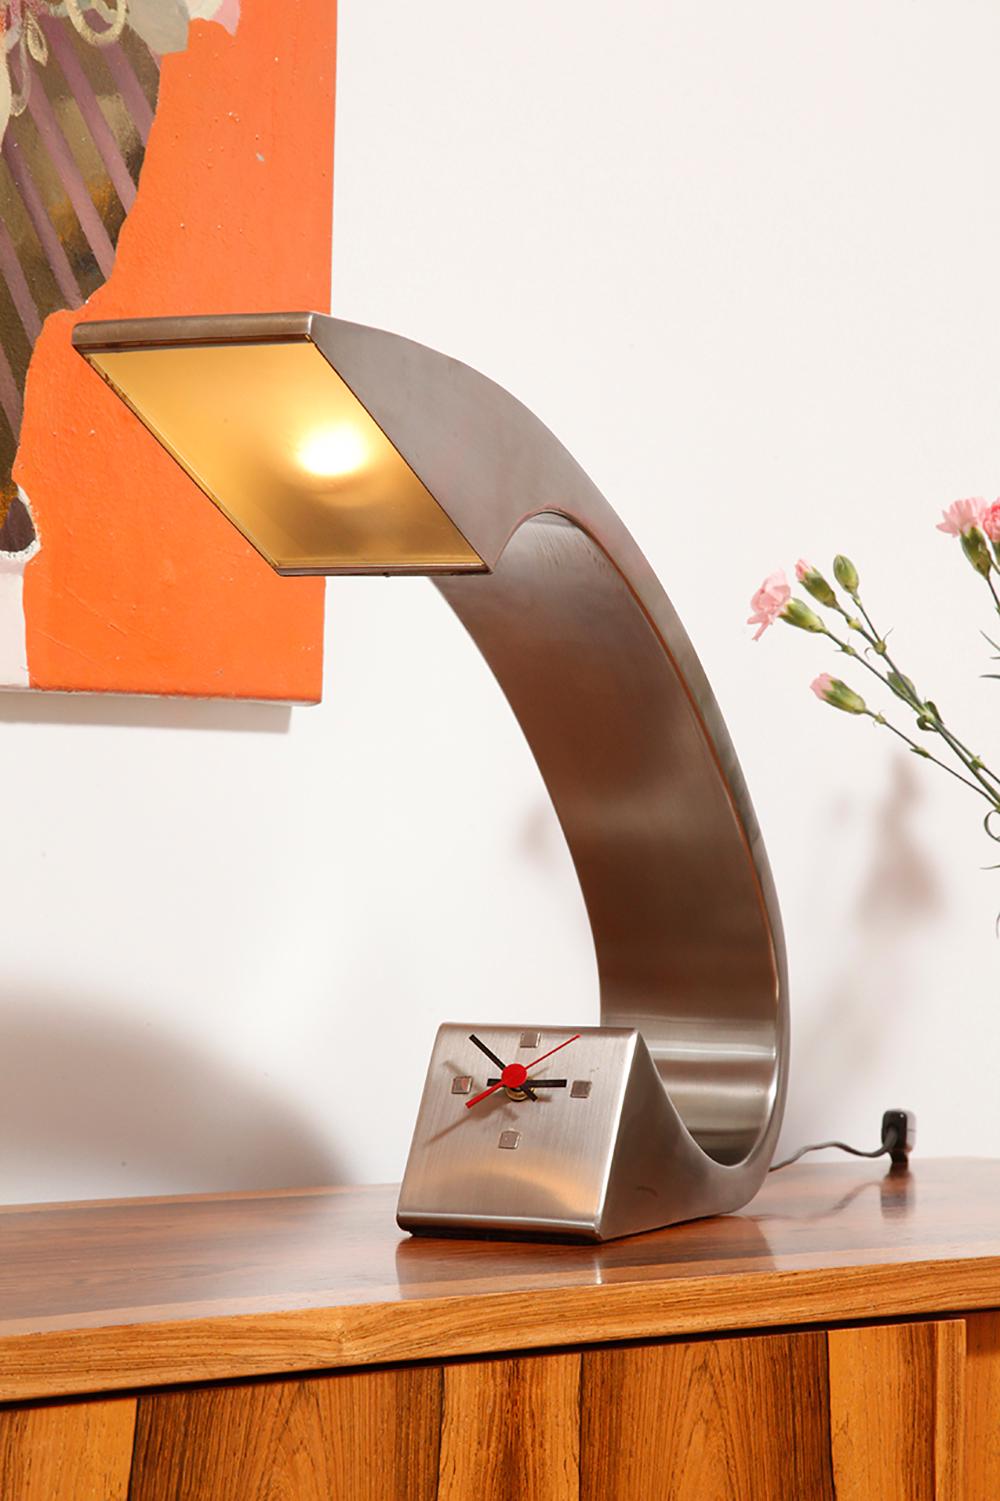 Large Steel Cabinet Lamp with a Small Clock 'Impala' by Fase, Spain 1970s For Sale 2